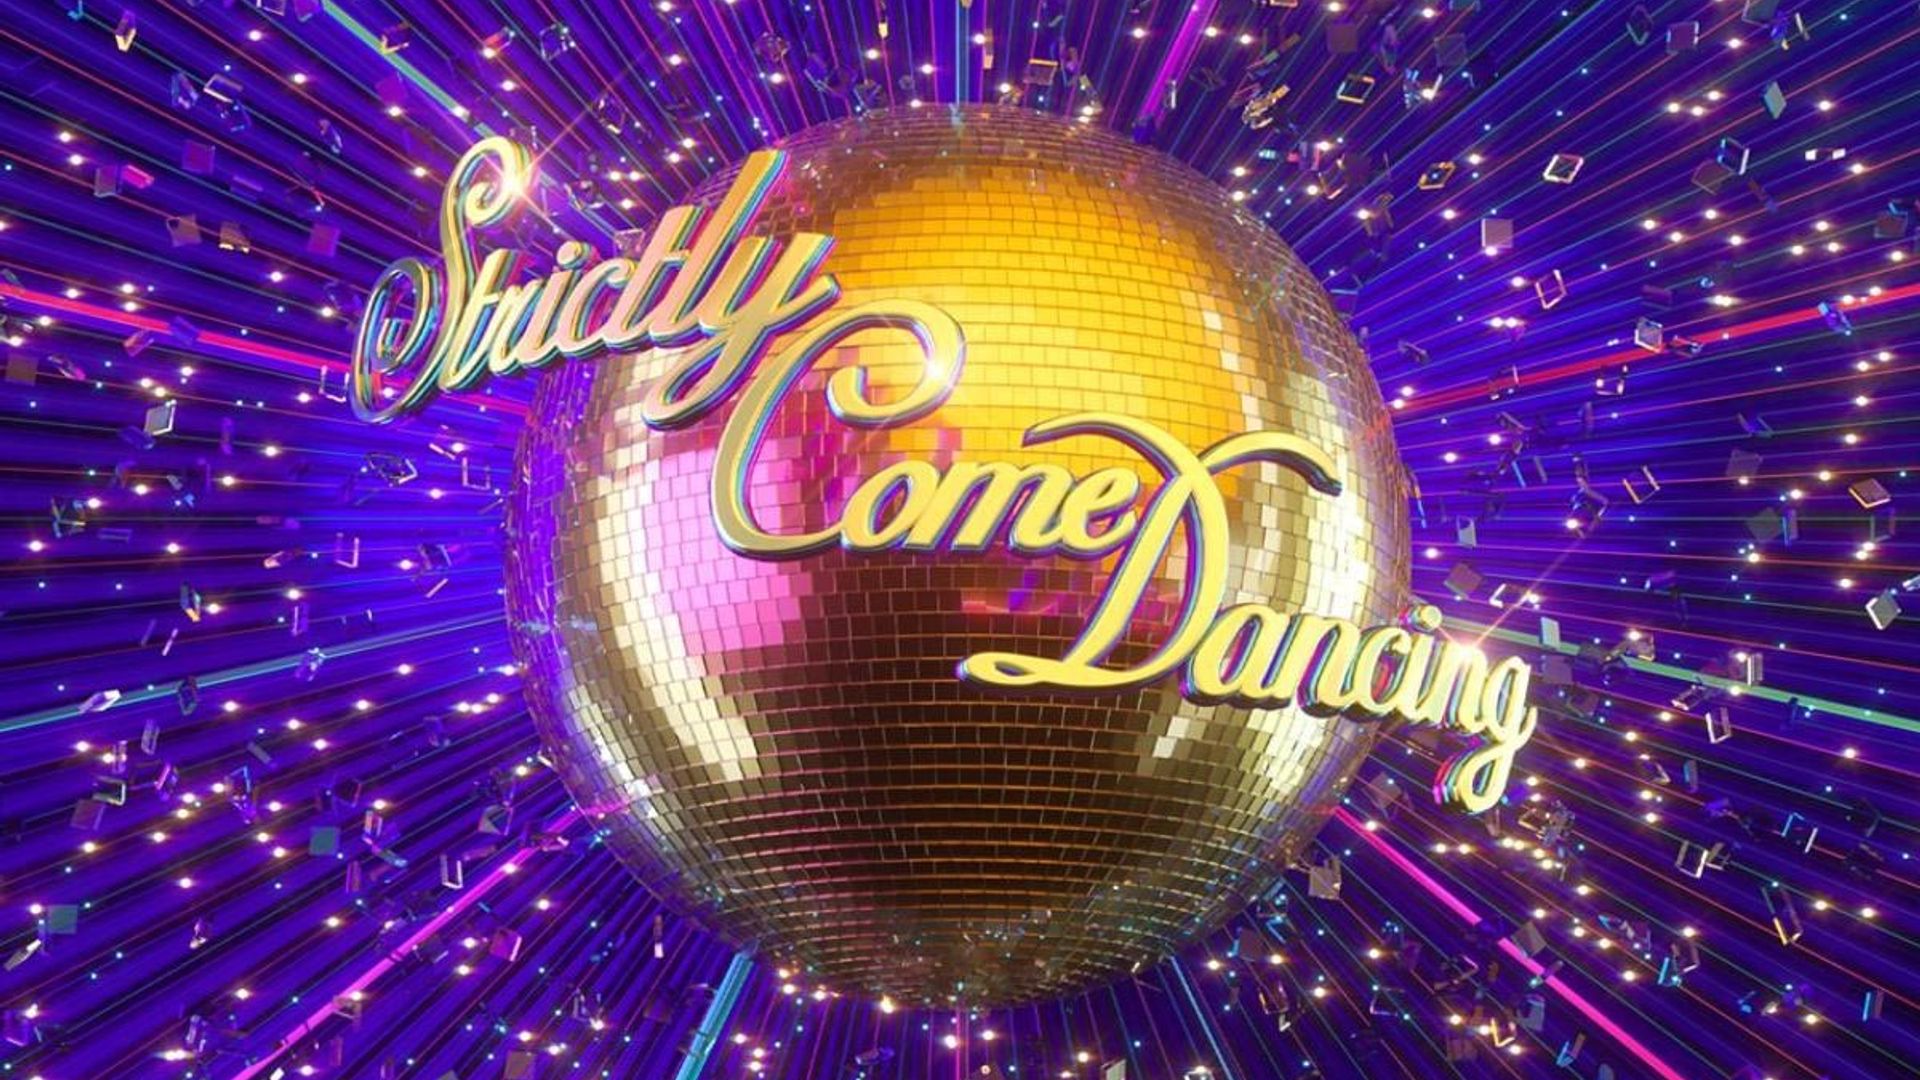 strictly come dancing logo